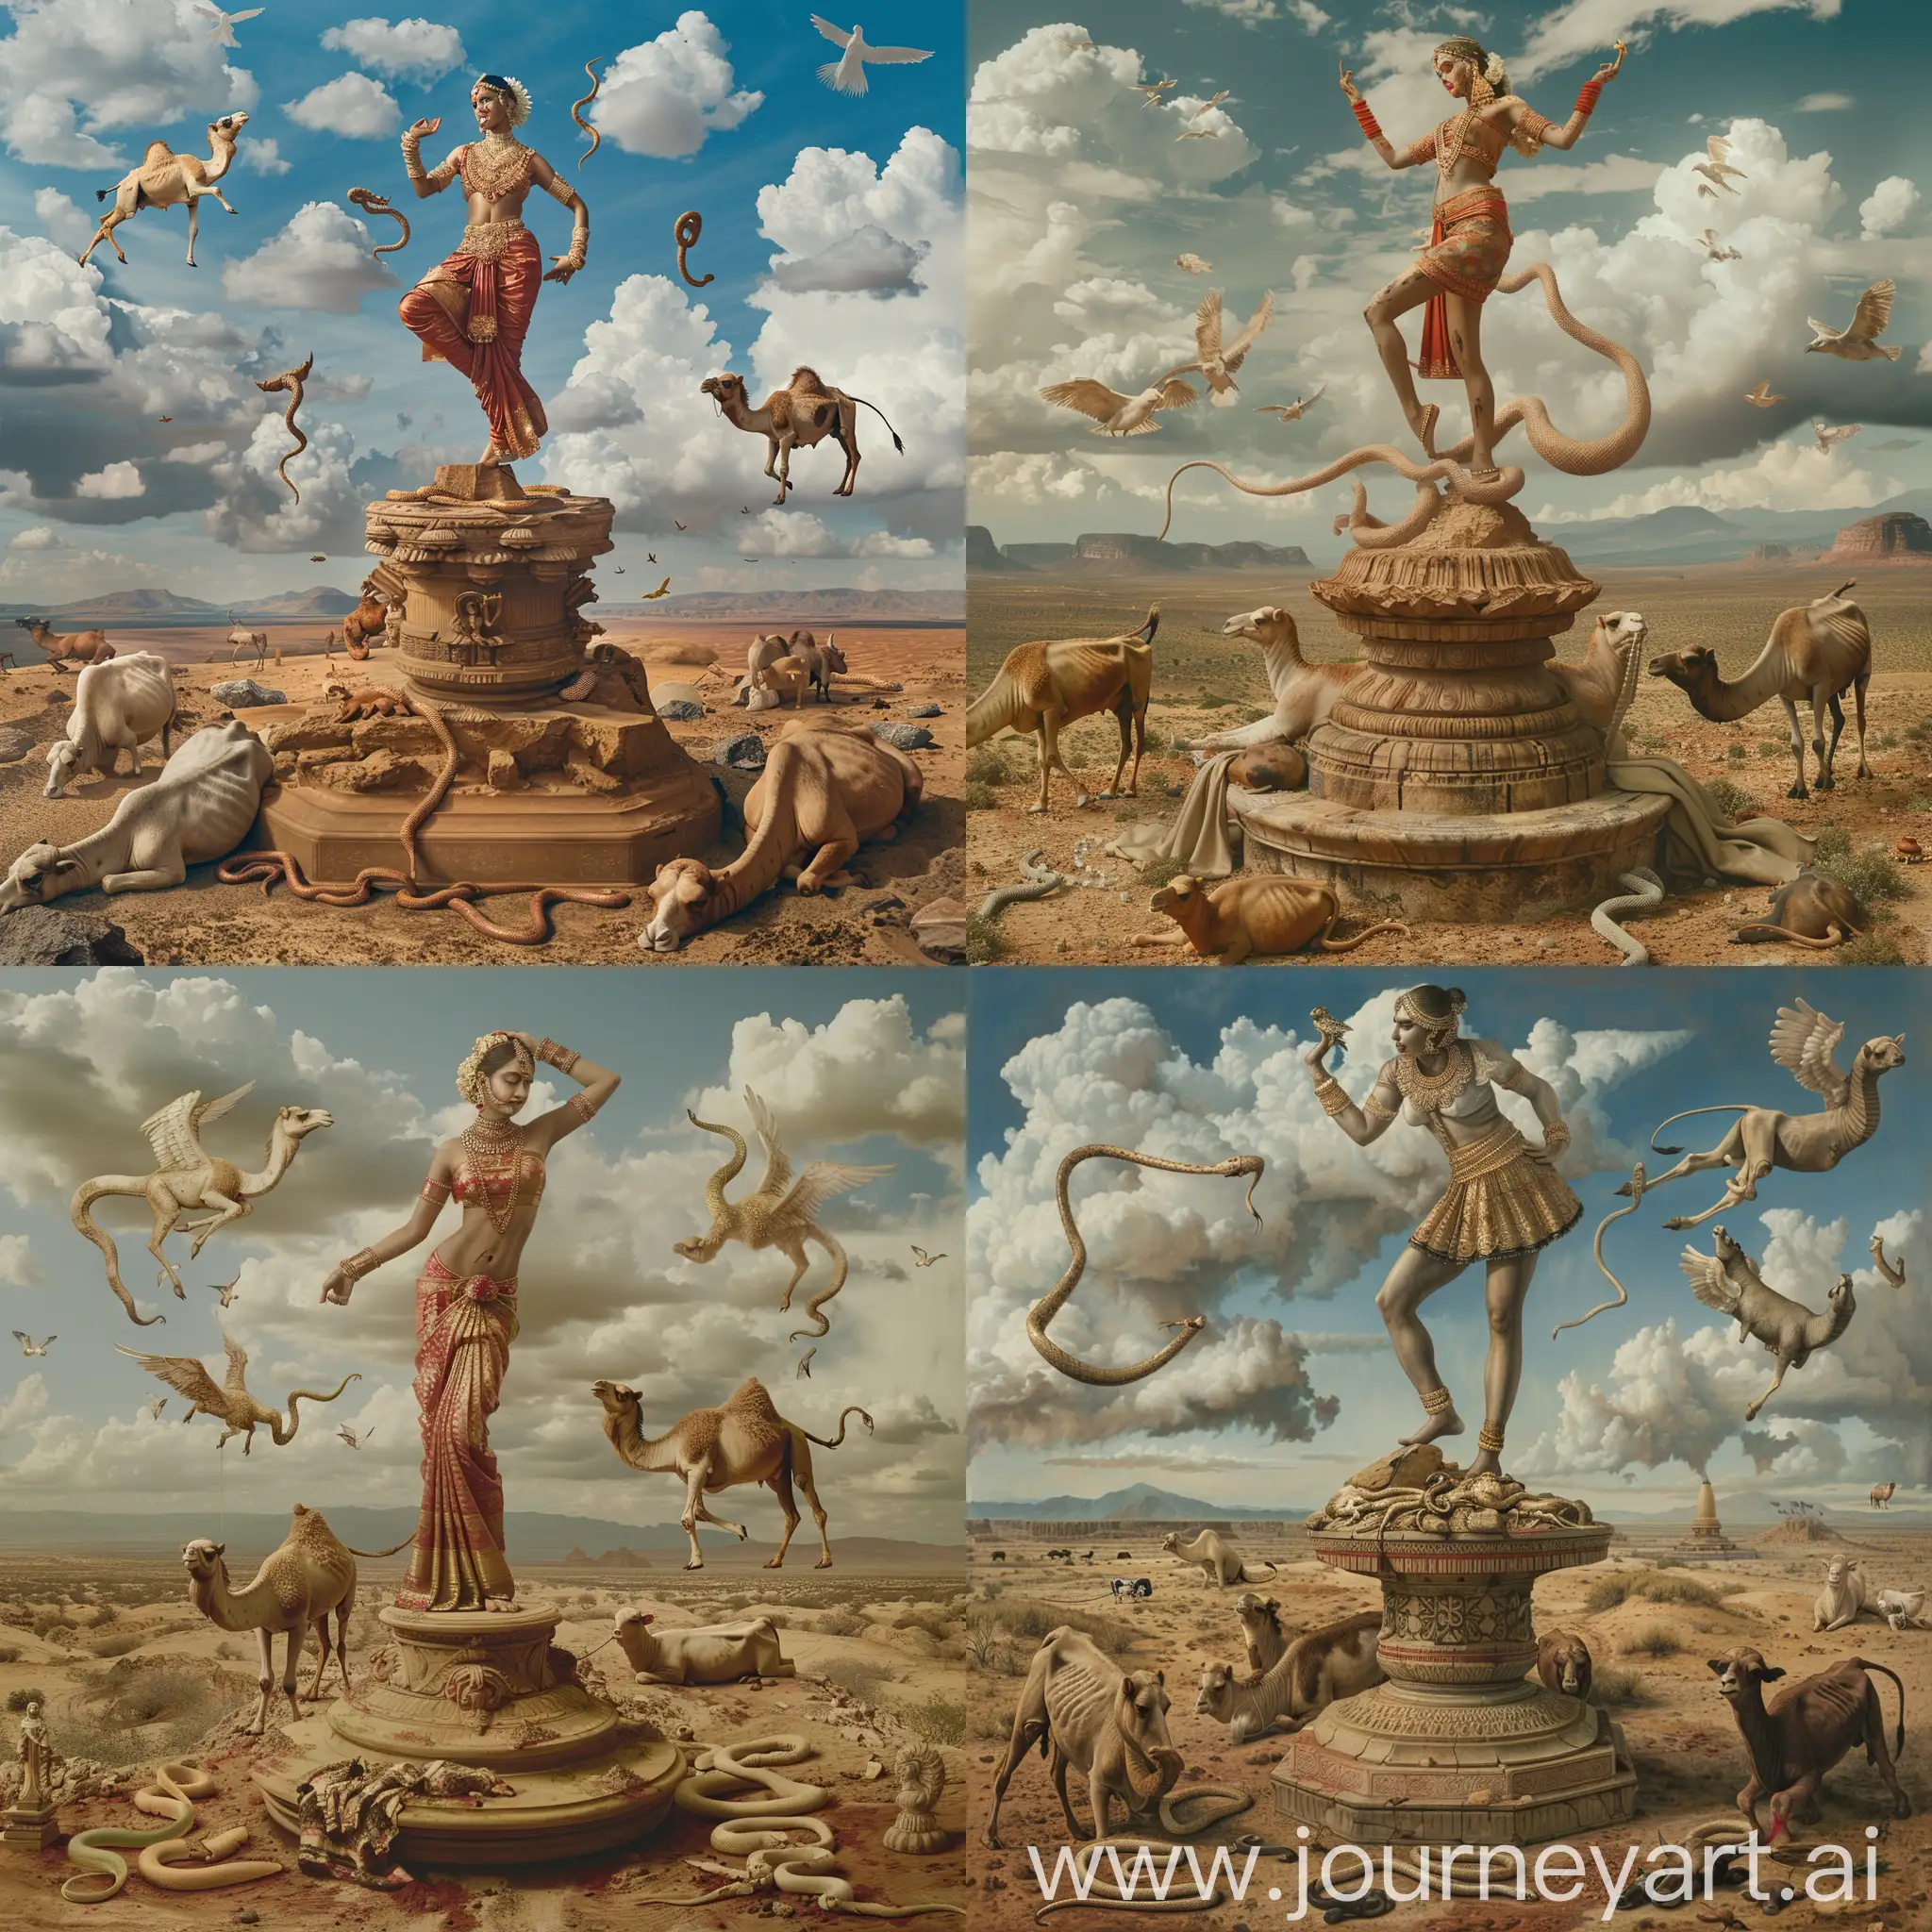 generate me a picture of a traditional indian dancer's statue unfinished standing in posture of a indian traditional dance on a pedestal in a desert with dead camels and cows lying in her feet and snakes emerging from the ground and clouds taking shape of angels make it in johannes vermeer style of art